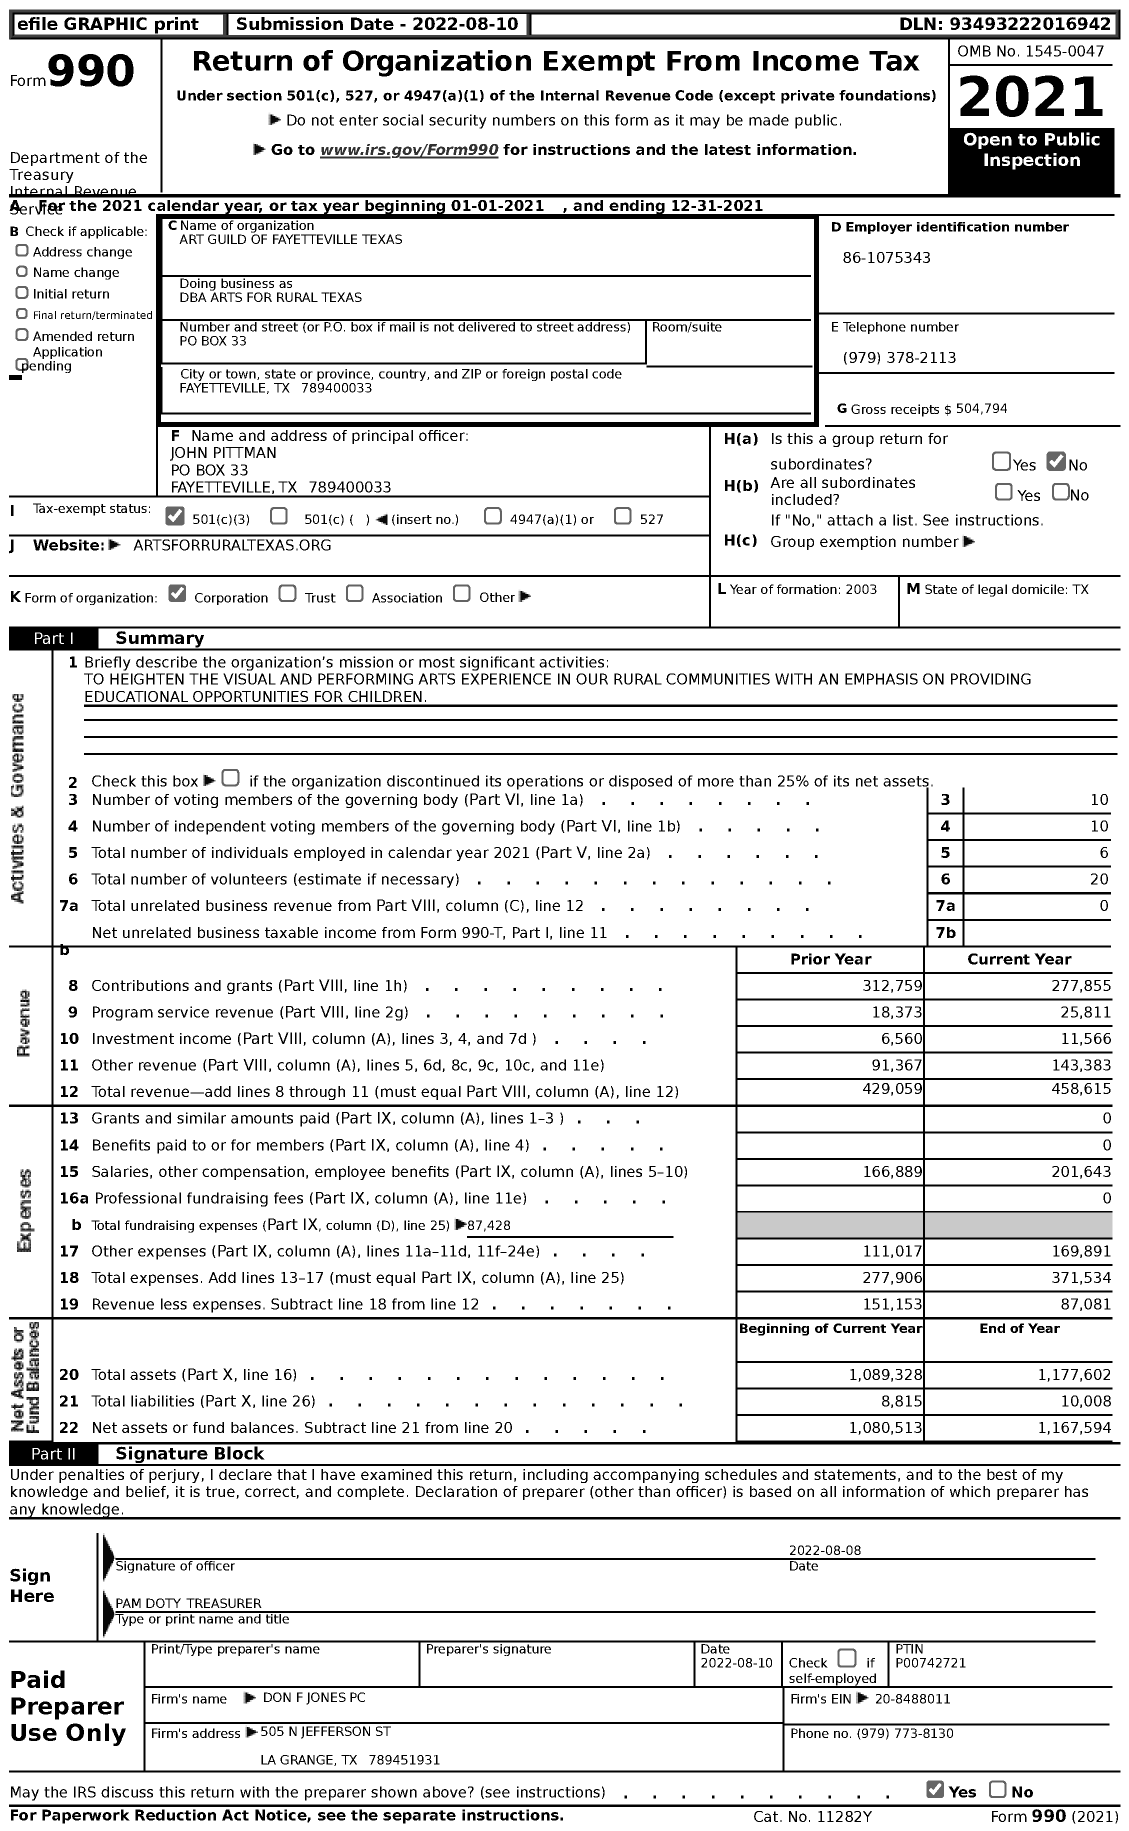 Image of first page of 2021 Form 990 for Arts for Rural Texas